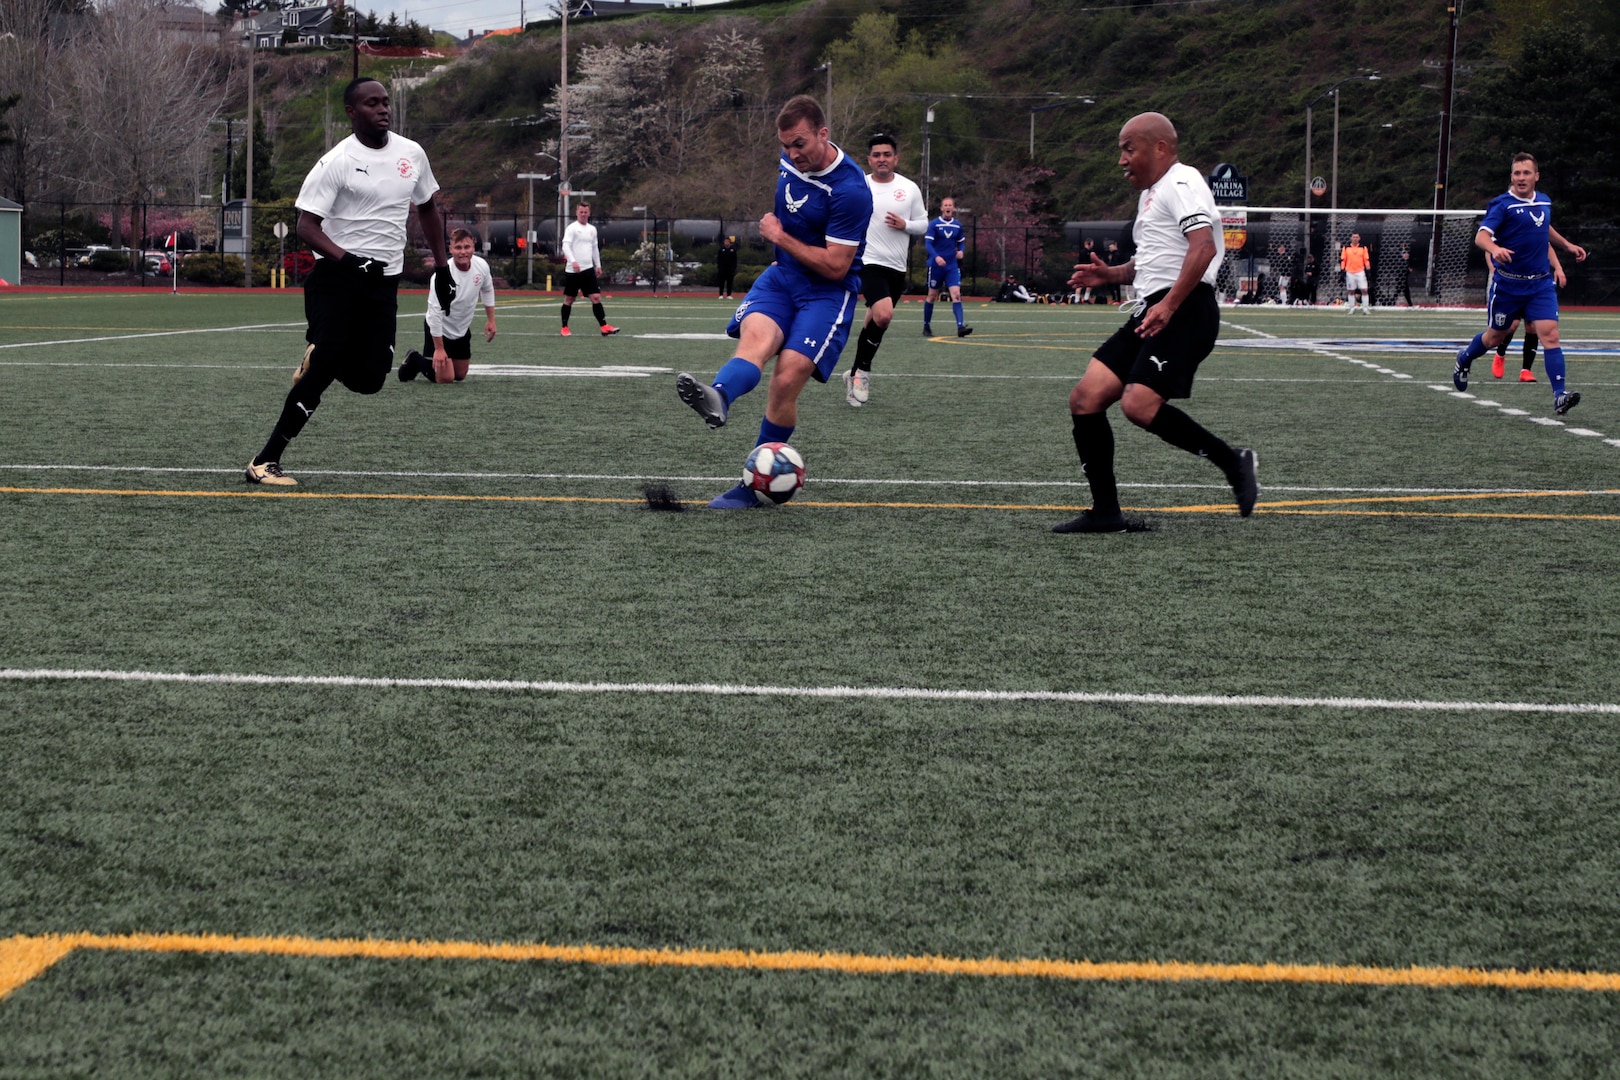 NAVAL STATION EVERETT, Wash.  (April 14, 2019) Air Force Capt. Andrew Belk (blue center) scores his first of two goals during the match versus Marine Corps during the 2019 Armed Forces Men's Soccer Championship held at Naval Station Everett, Wash. from 14-20 April, featuring Service members from the Army, Marine Corps, Navy (including Coast Guard) and Air Force. (U.S. Navy photo by MC2 Ian Carver/Released)